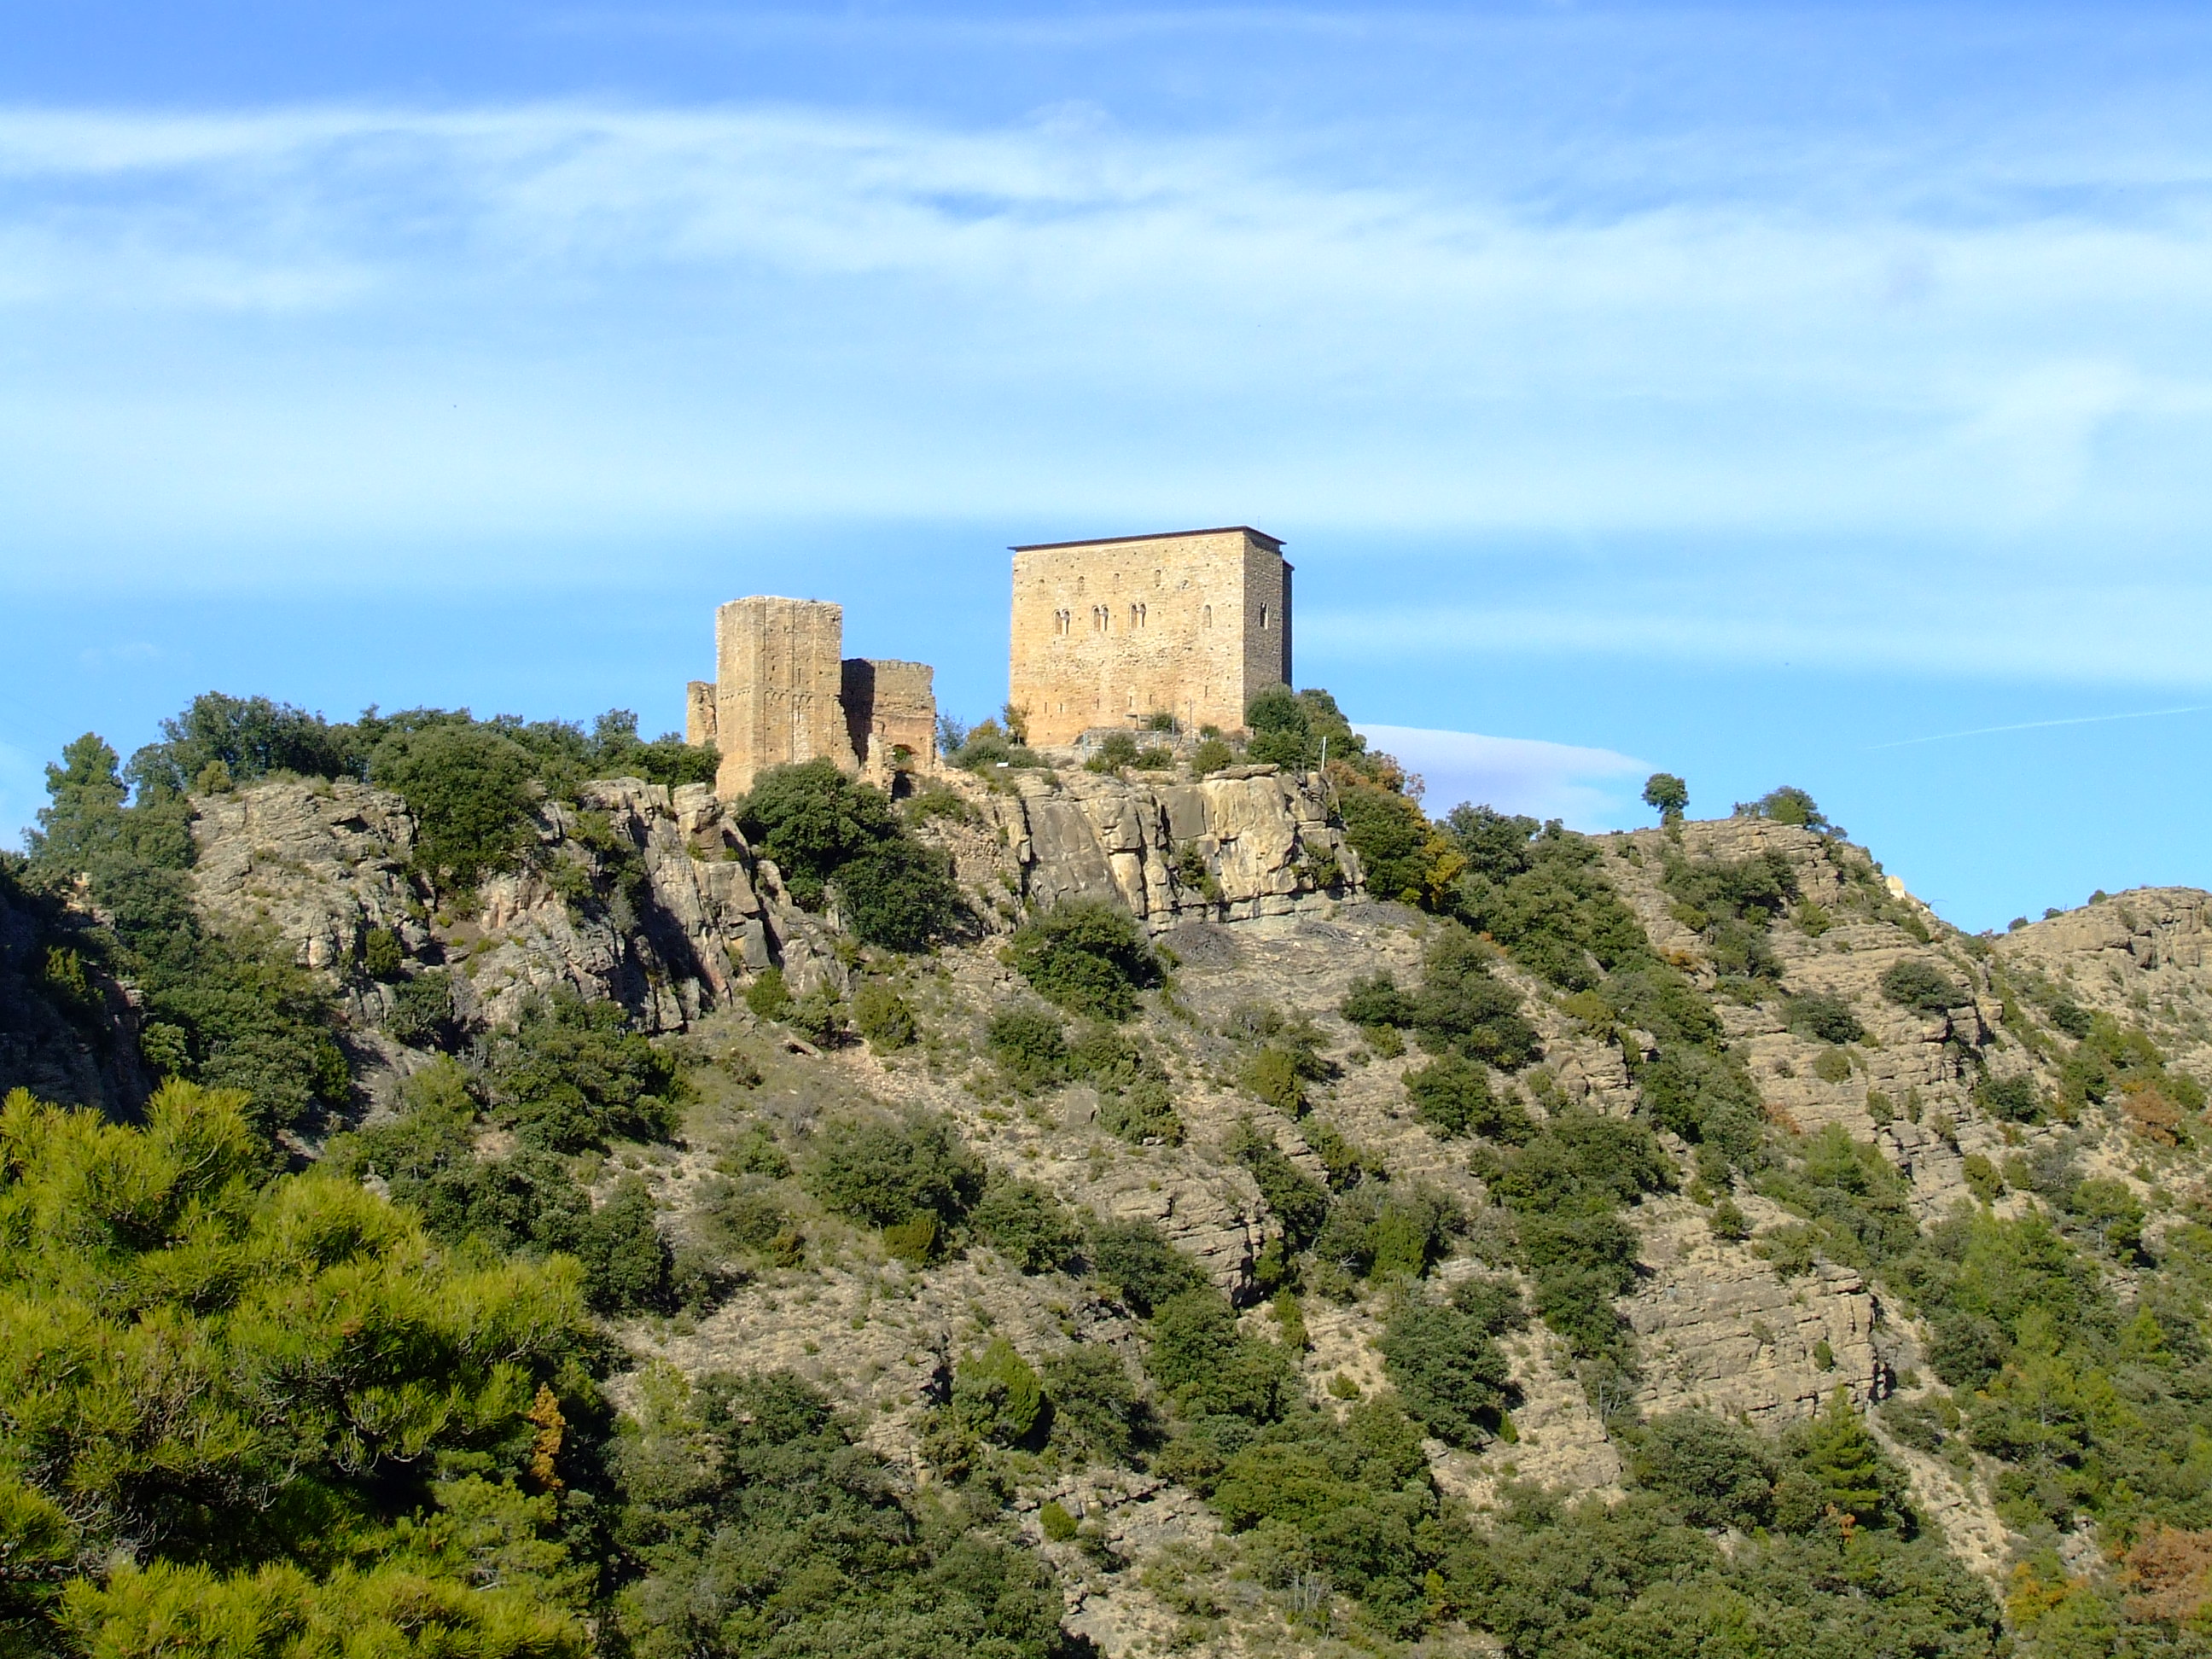 The twelfth-century structure of the Castell de Llordà, above the Vall d'Isona in Catalonia